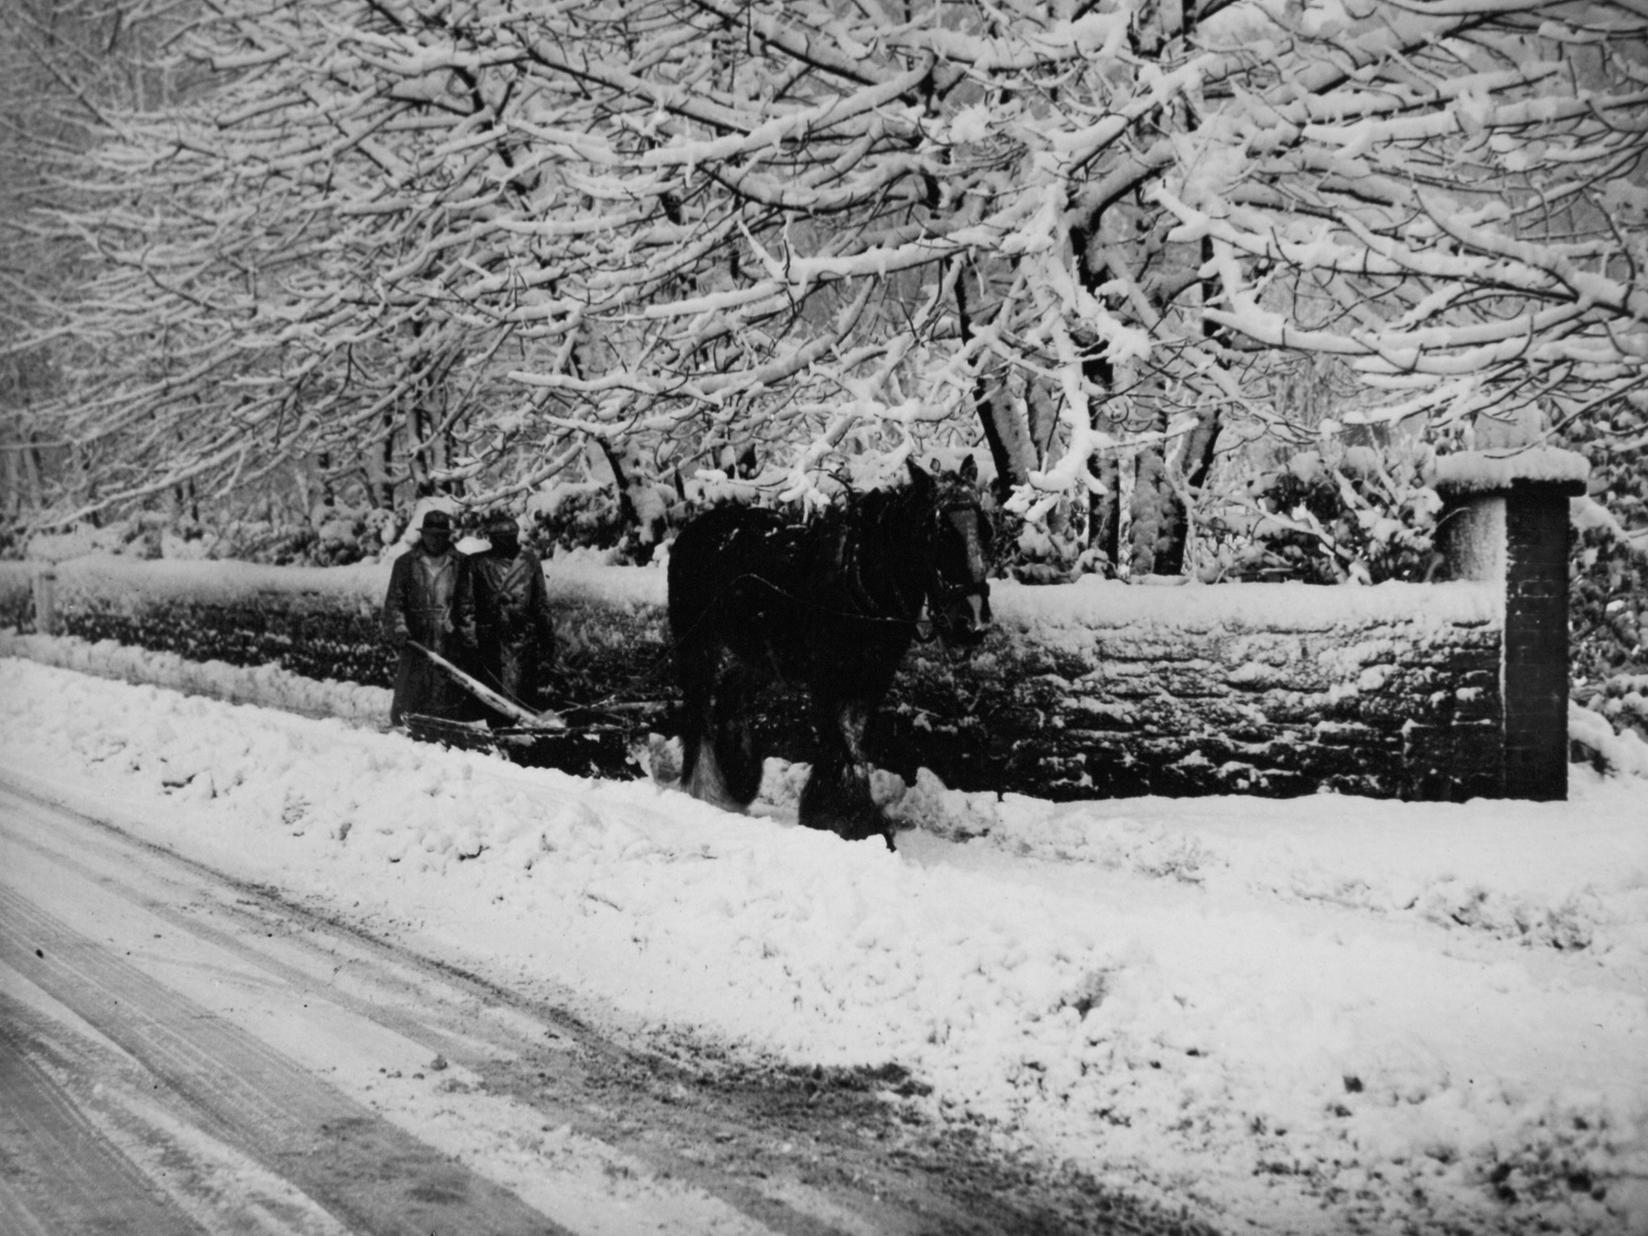 This image shows the horsepower needed to clear the snow on the Leeds to Wetherby Road.